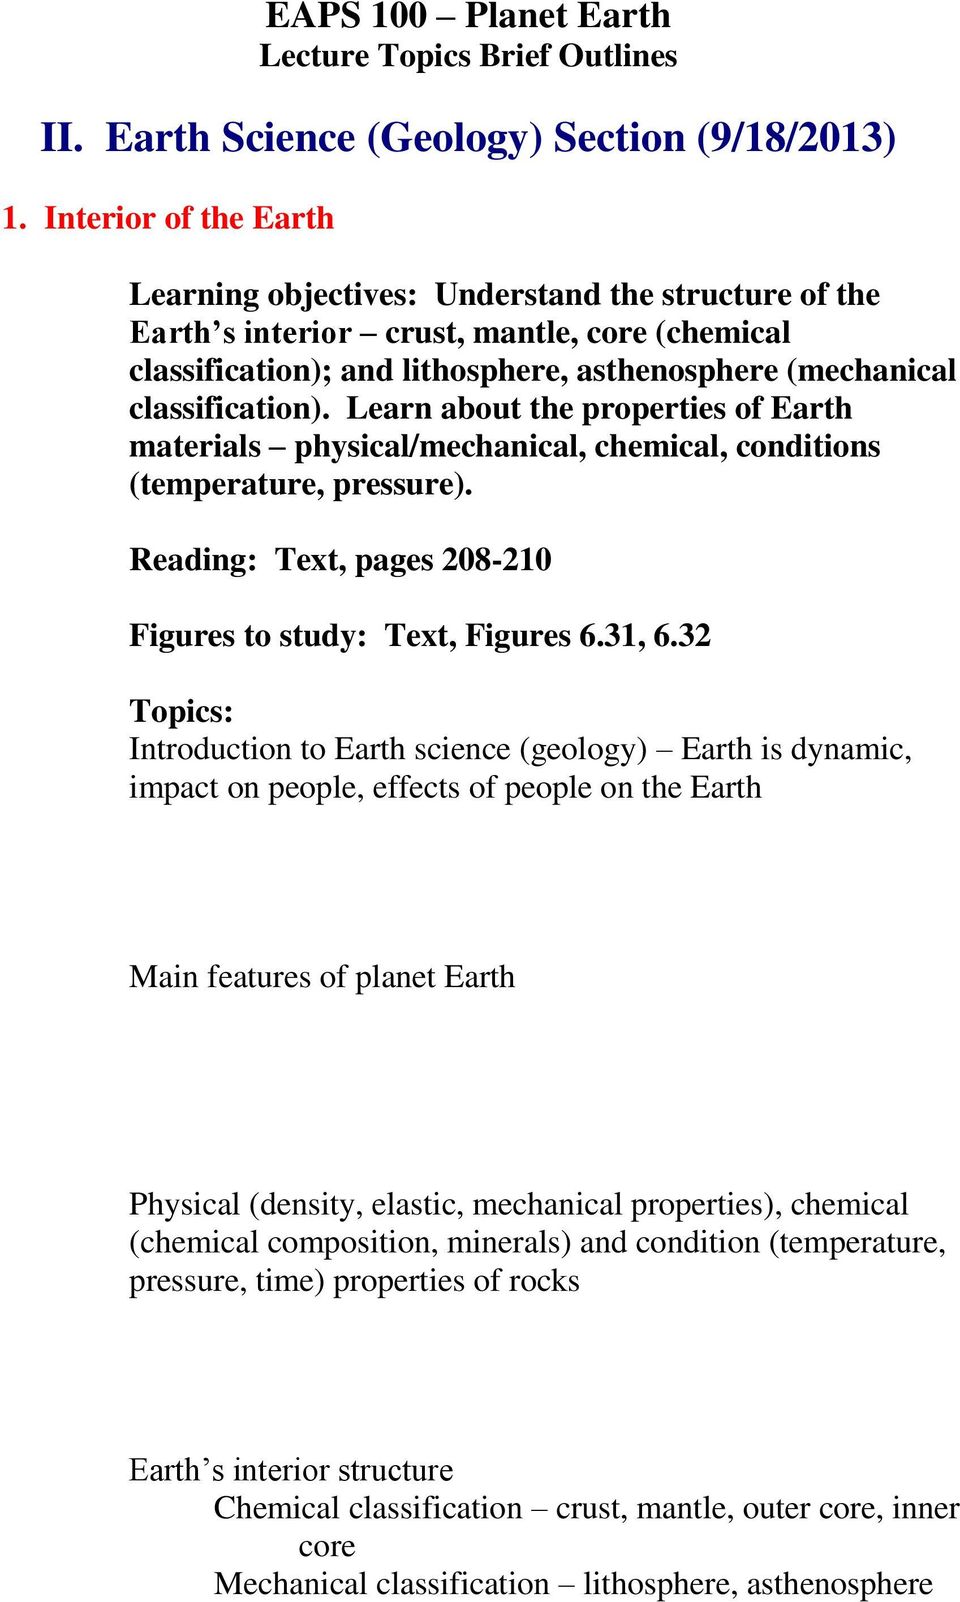 Learn about the properties of Earth materials physical/mechanical, chemical, conditions (temperature, pressure). Reading: Text, pages 208-210 Figures to study: Text, Figures 6.31, 6.